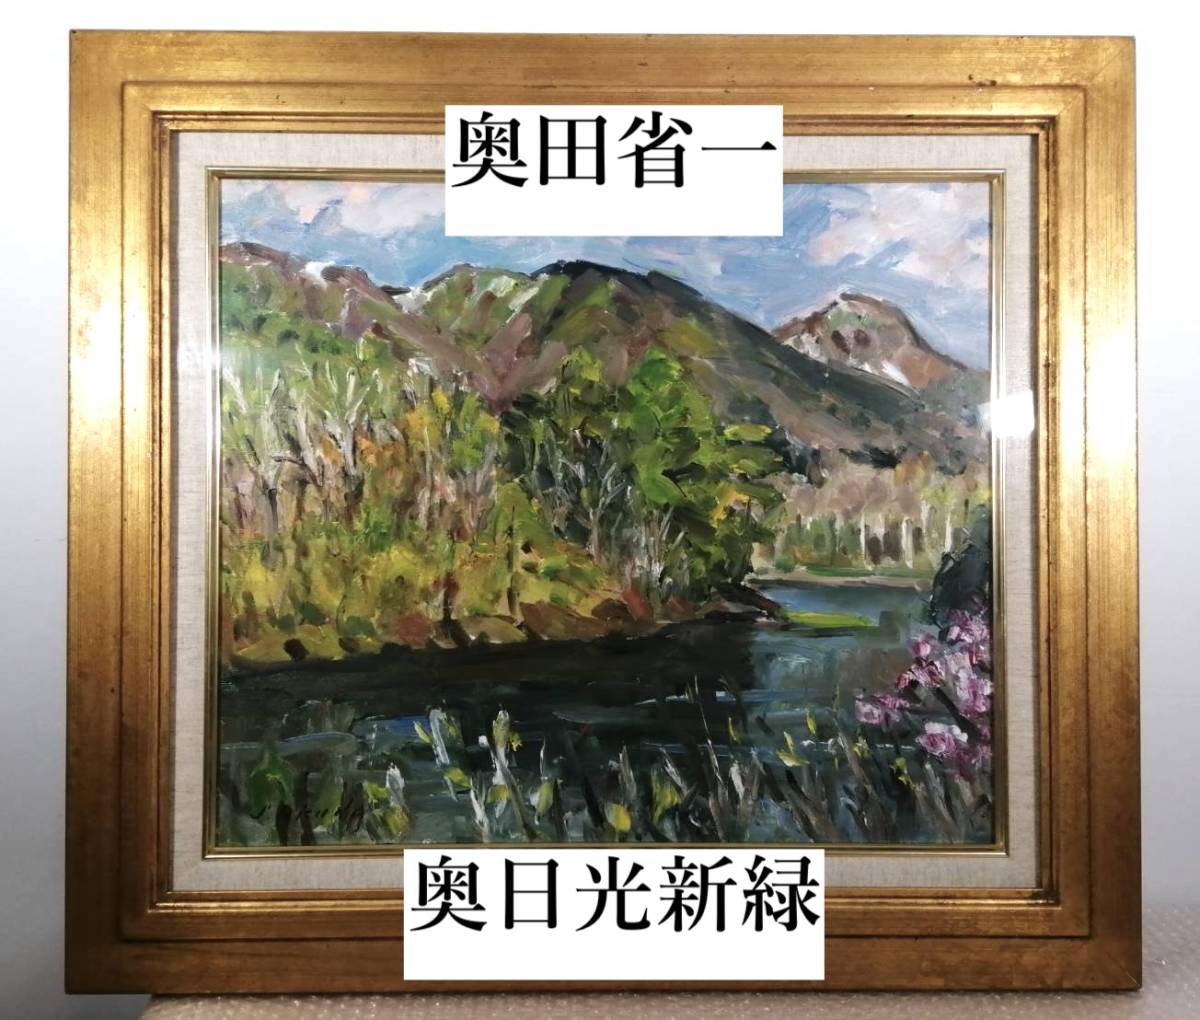 A masterpiece by Shoichi Okuda, guaranteed authentic, F10 size, Oku-Nikko New Greenery, oil painting, gold frame, painting, landscape painting, active in the Kofu-kai and member of Daiichi Bijutsu, from Kumamoto, beginning of spring, welcoming the New Year, Nikko, Painting, Oil painting, Nature, Landscape painting